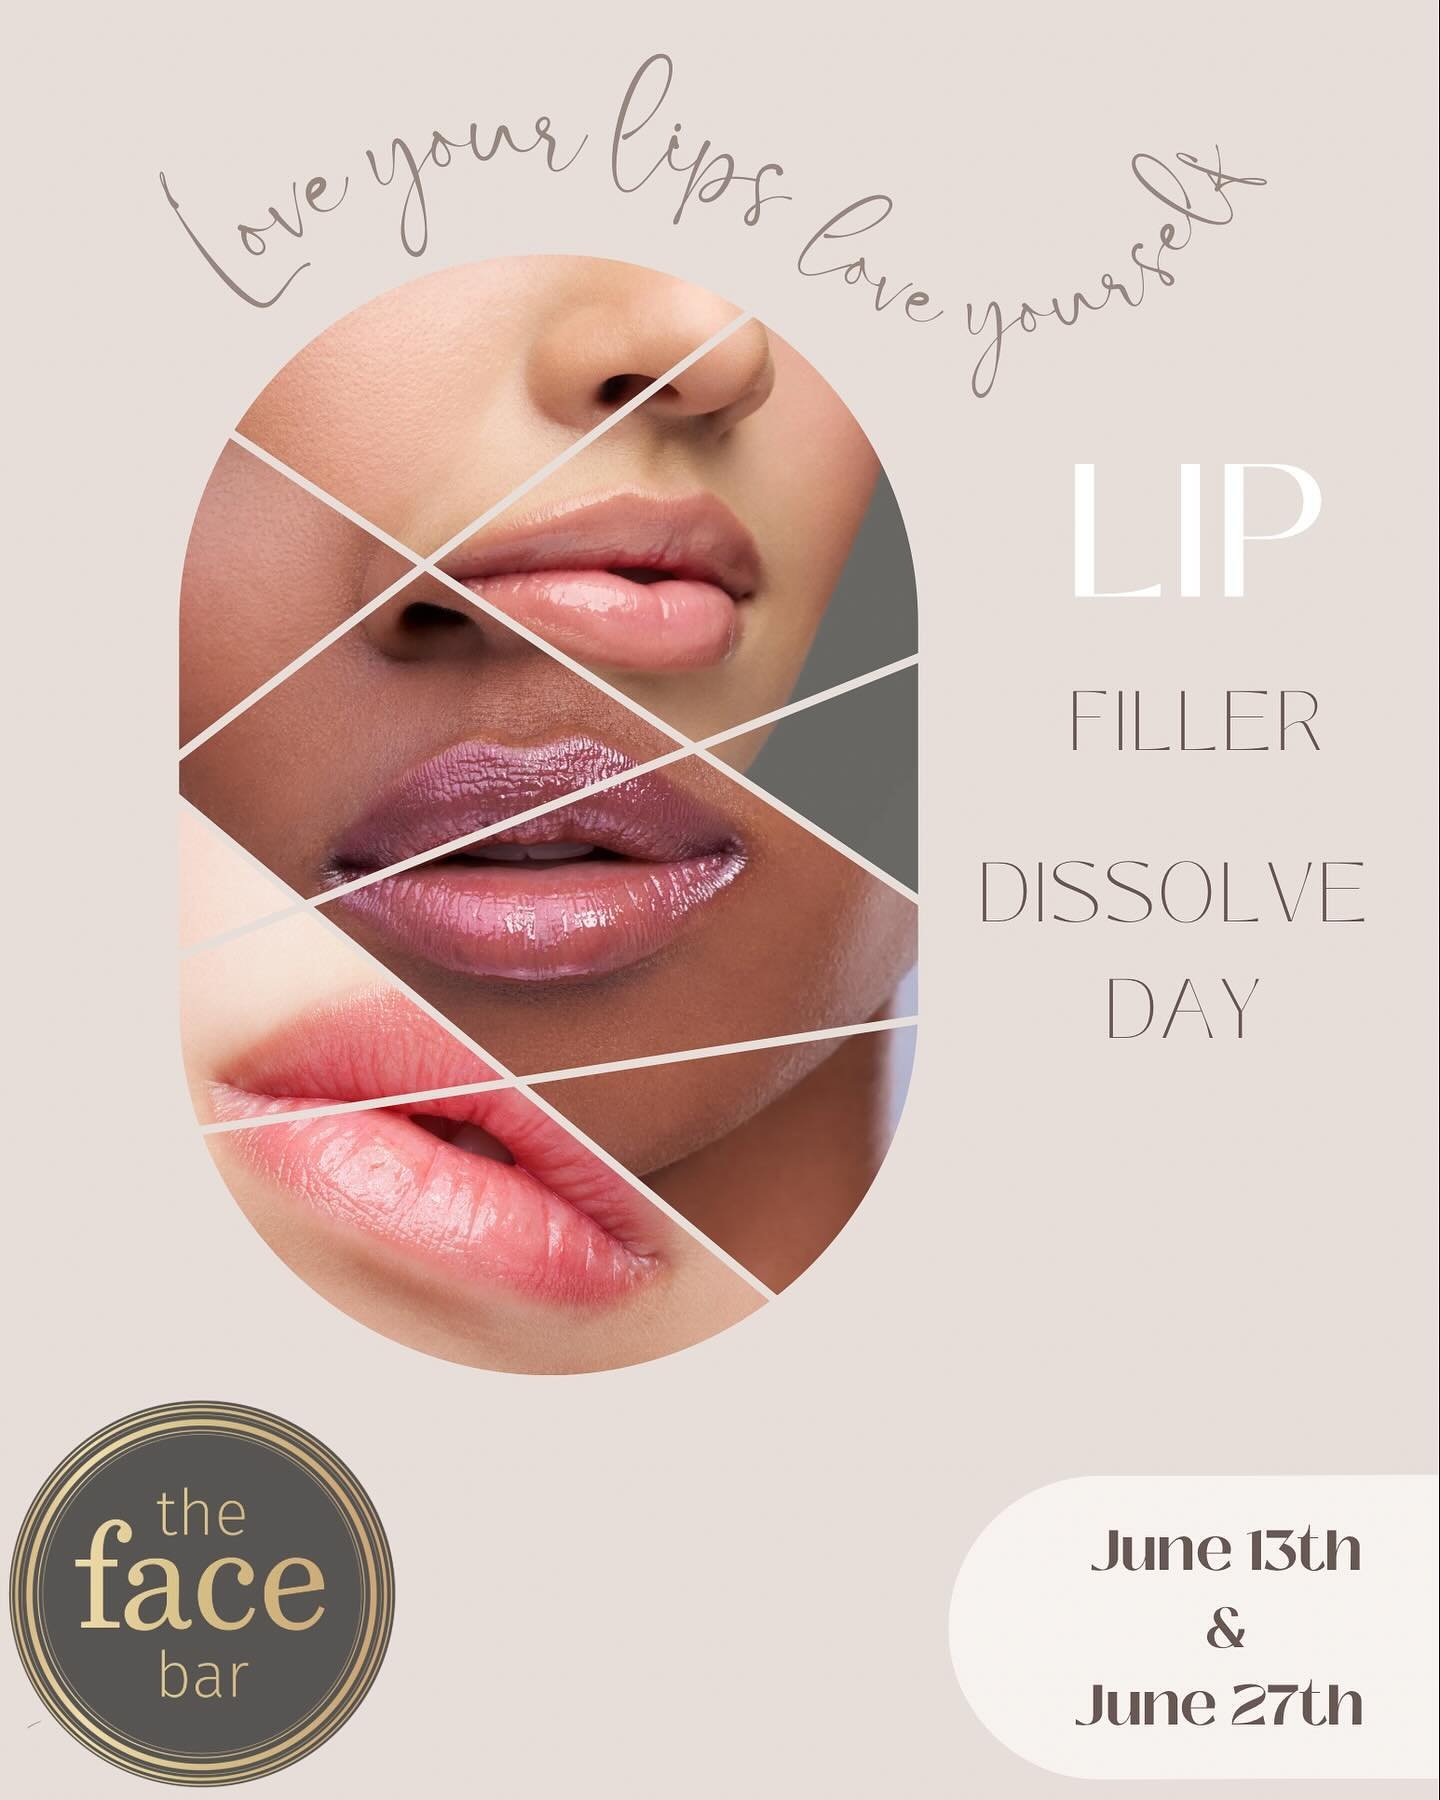 JUNE SPECIAL☀️ 
 
Let&rsquo;s give your lips a makeover out of this world💋

On June 13th and 27th for only $850 you can come get all your lip filler dissolved and pre pay for your next syringe!  #freshstart